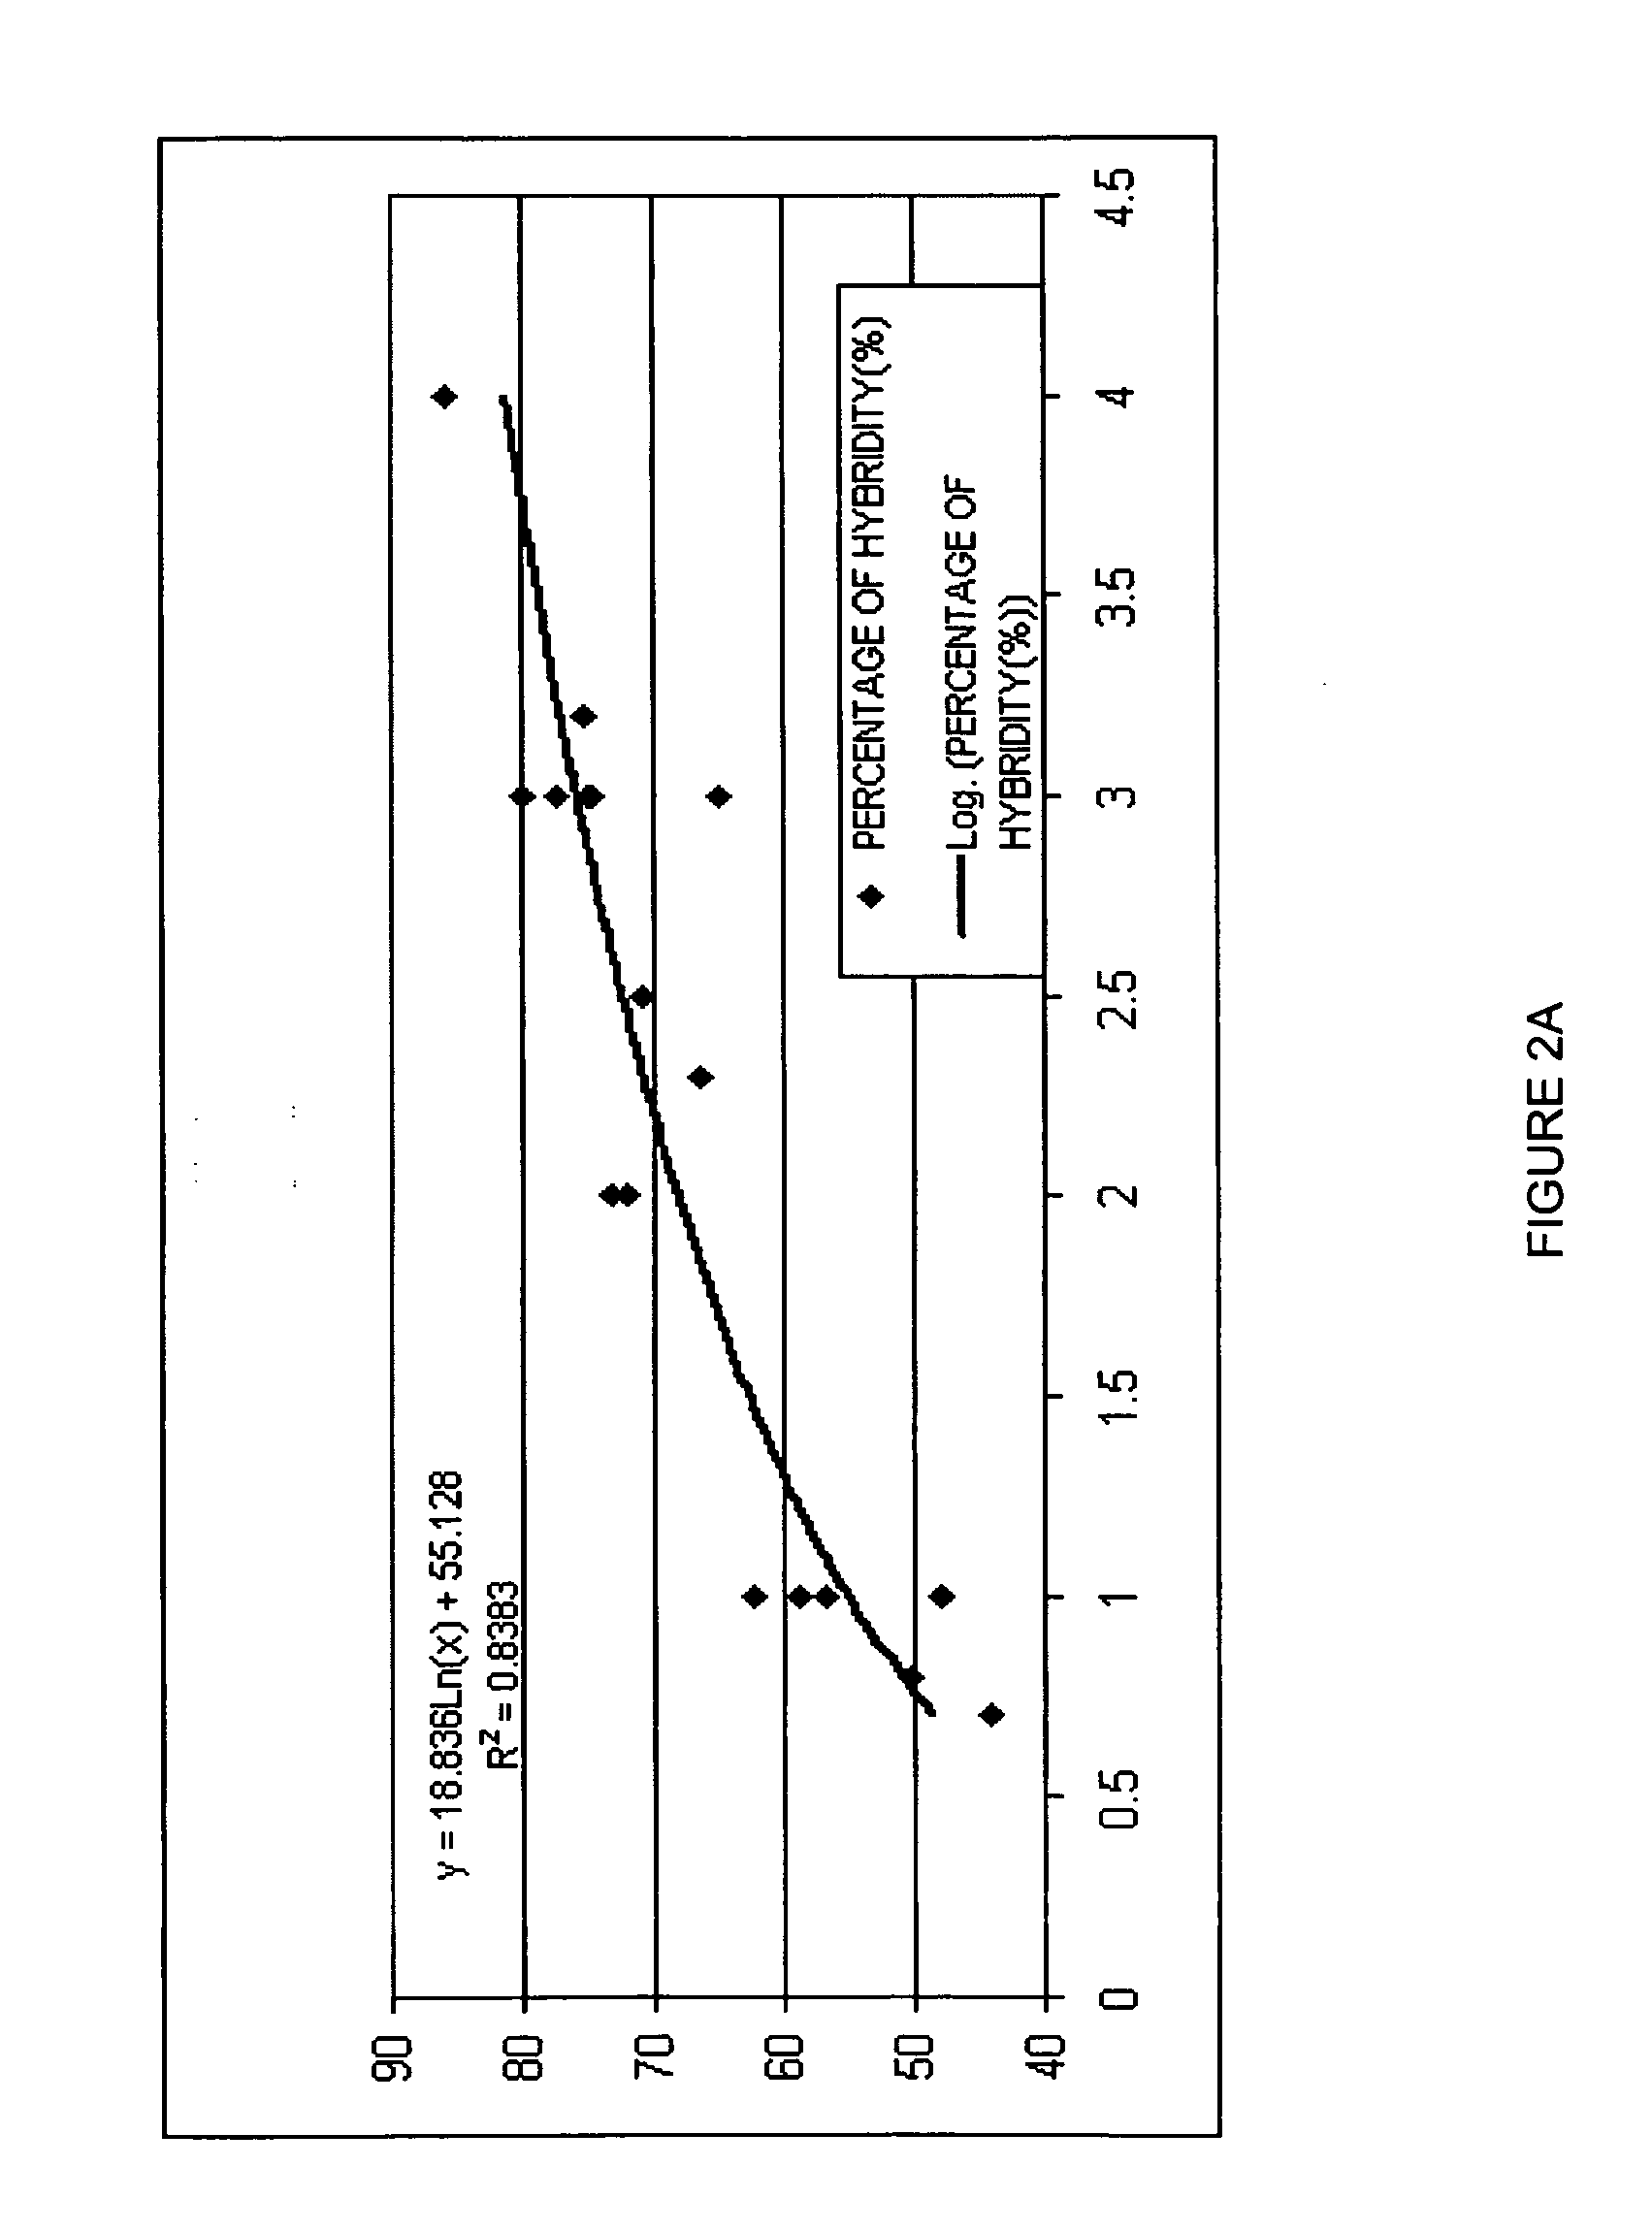 Methods for producing a hybrid seed product